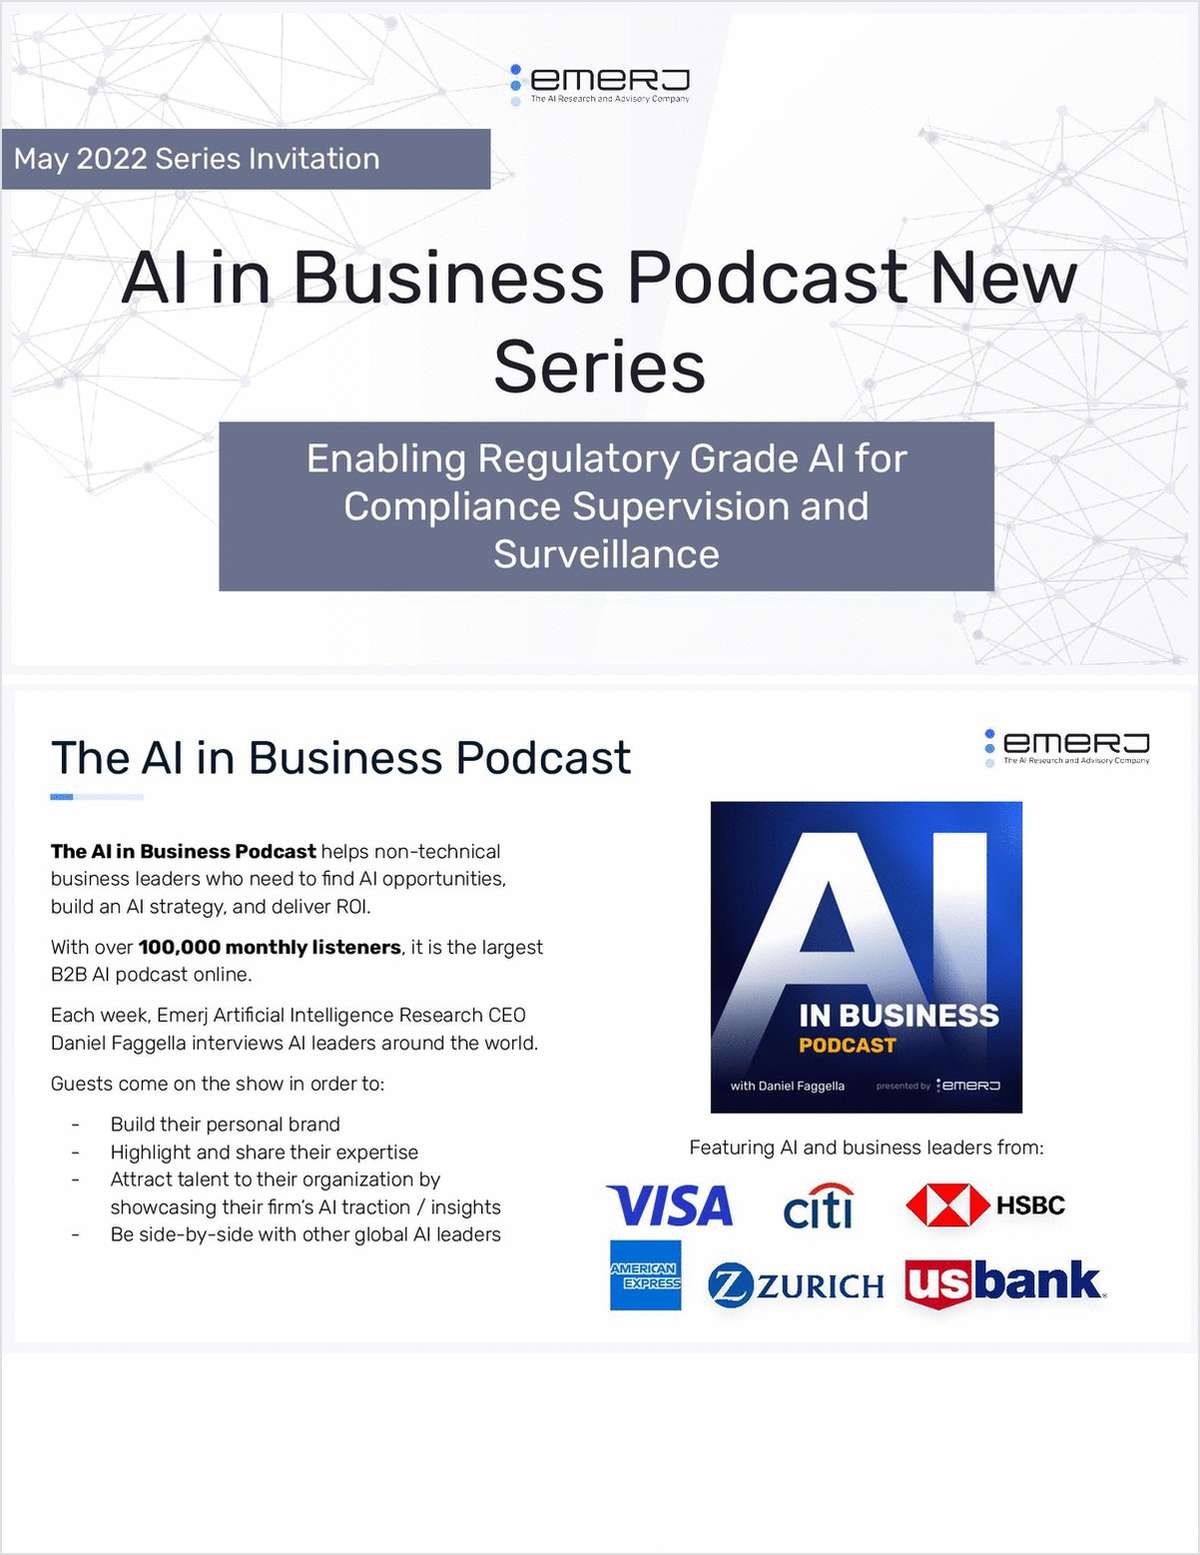 AI in Business Podcast Series Invitation - Enabling Regulatory Grade AI for Compliance Supervision and Surveillance